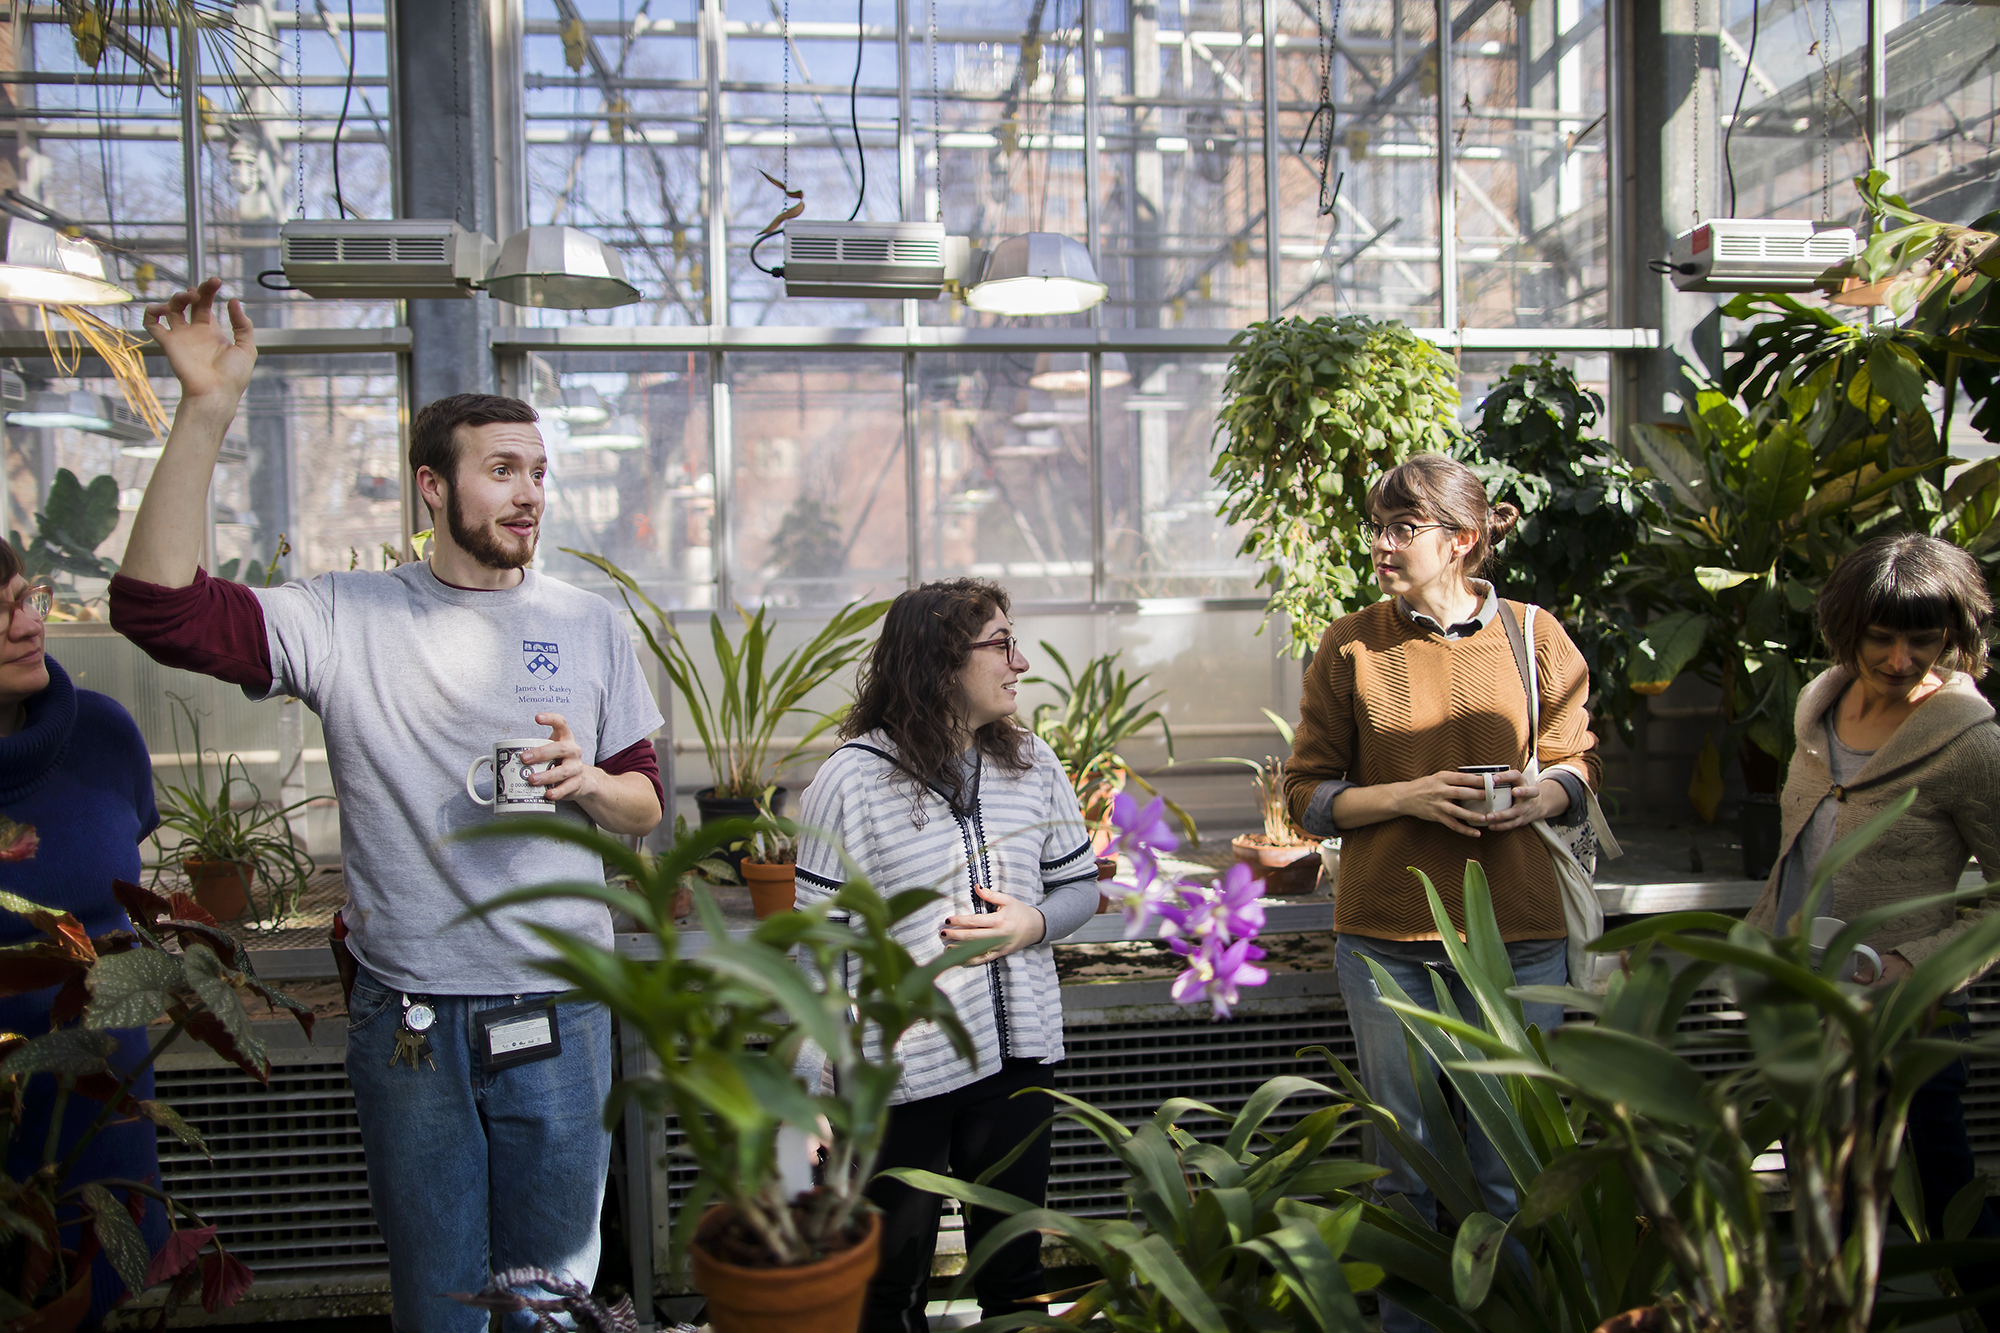 Gardeners standing together in a greenhouse